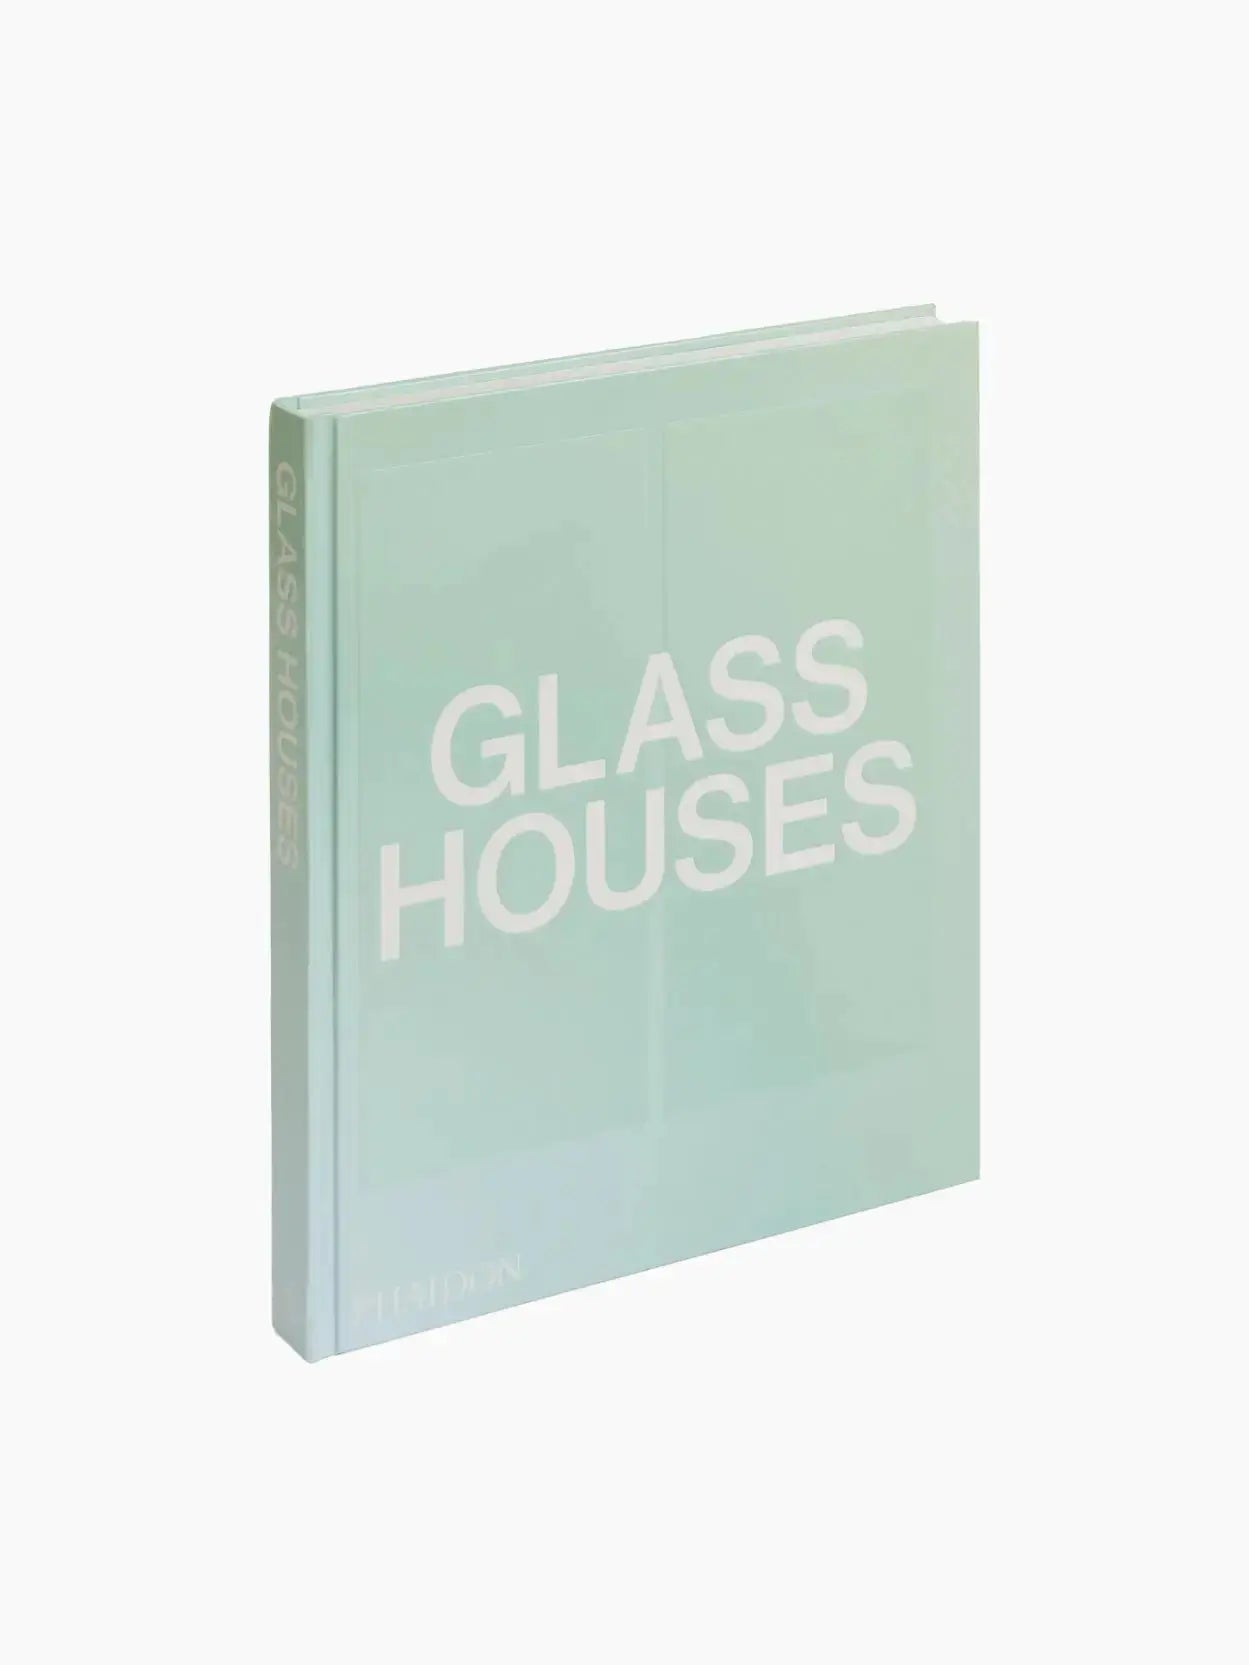 The image shows a light teal hardcover book titled "Glass Houses" tilted slightly backward, displayed in a bassalstore. The text "Glass Houses" is prominently displayed in large white letters on the front cover and spine. The brand name, "Phaidon," appears in smaller white letters at the bottom.